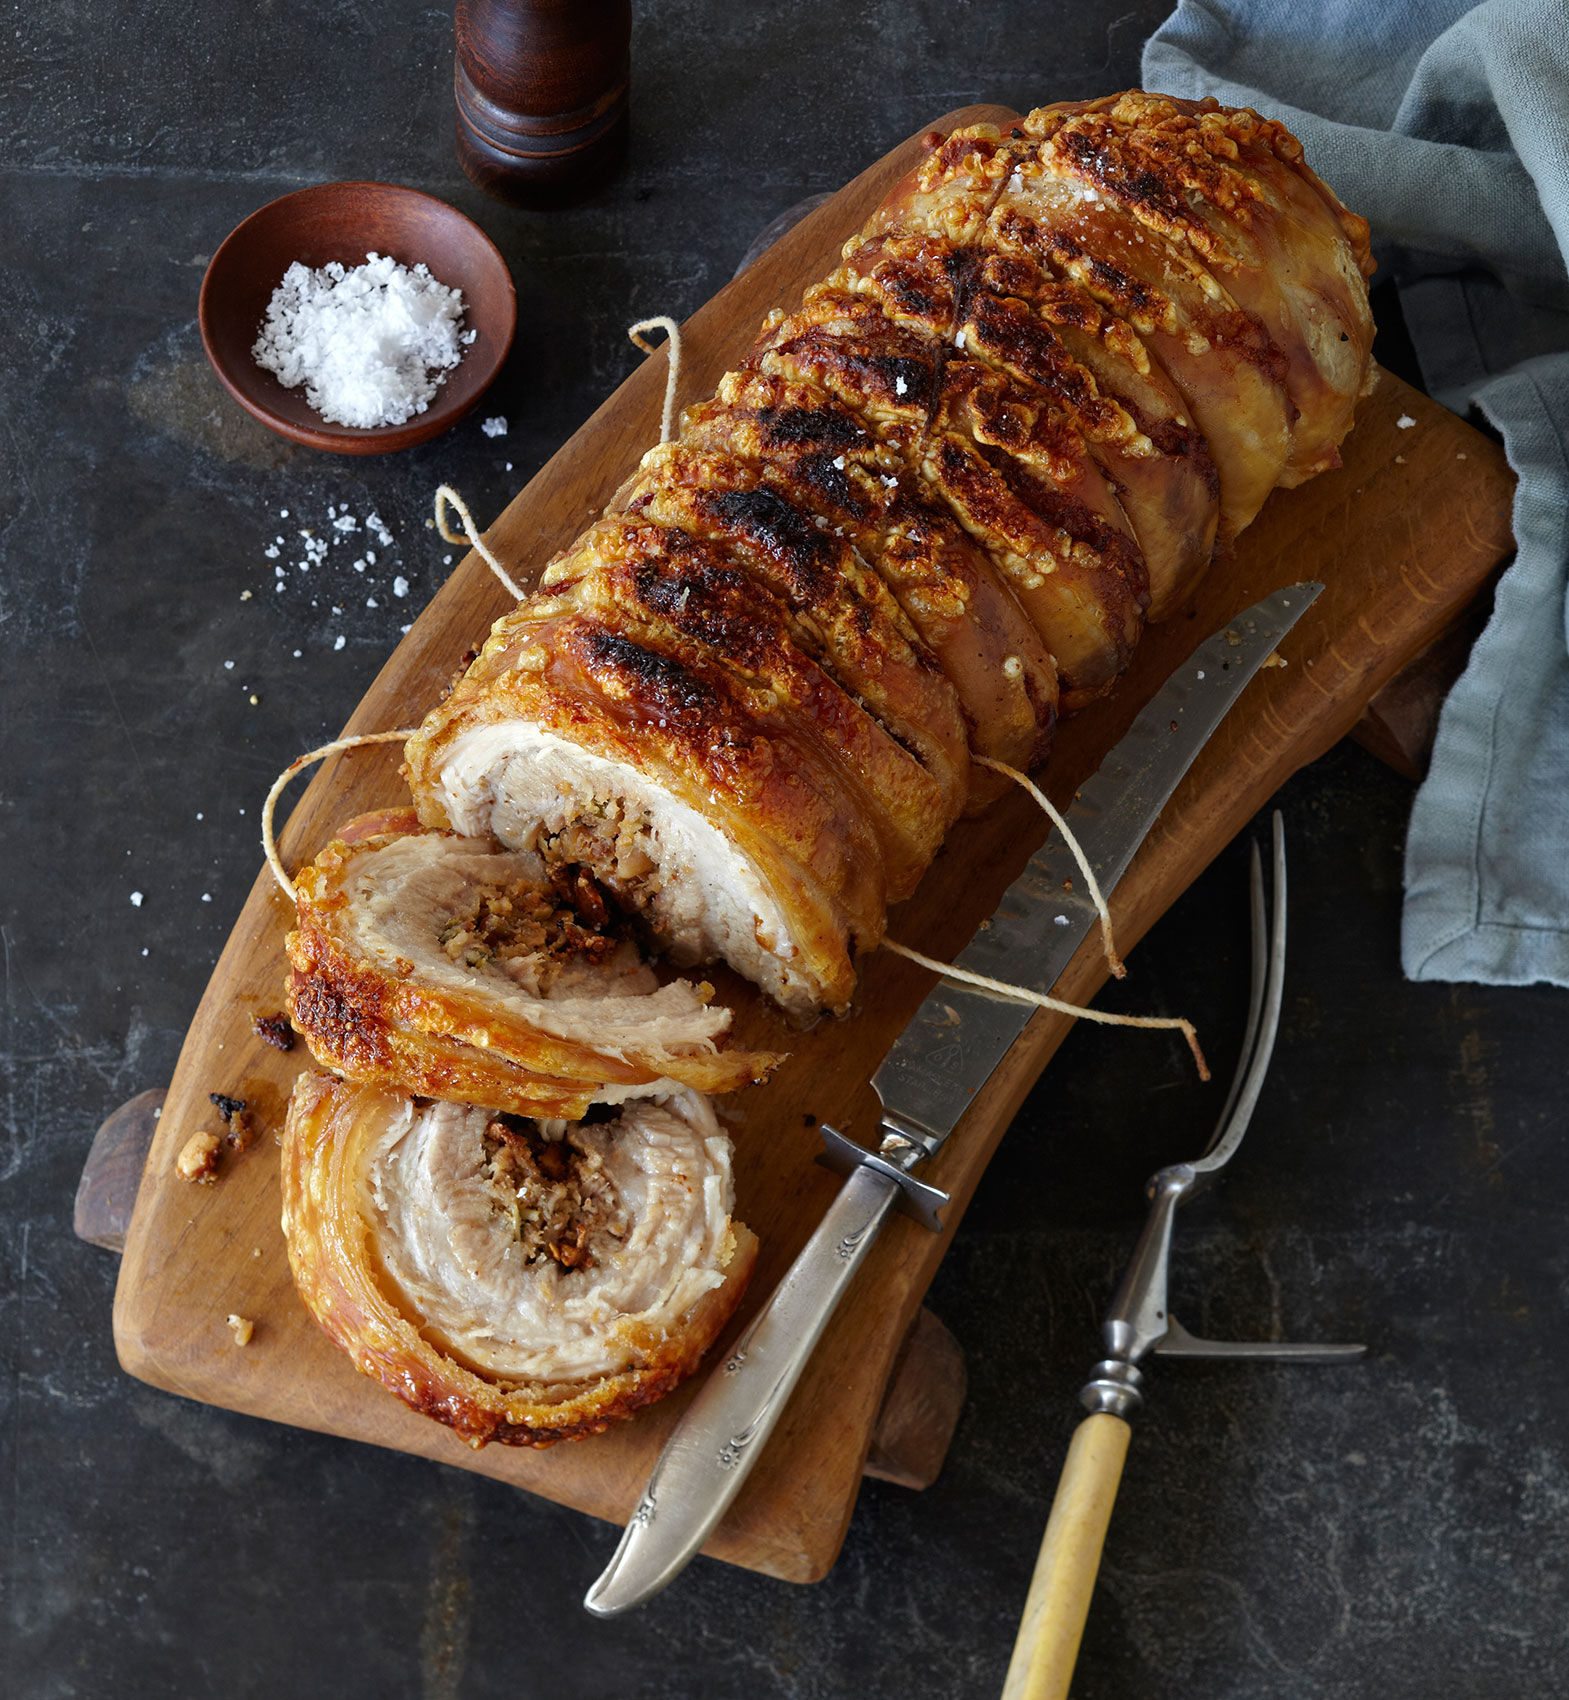 Everyday • Rolled Pork with Carving Knife & Fork on Wooden Board • Hospitality & Editorial Food Photography